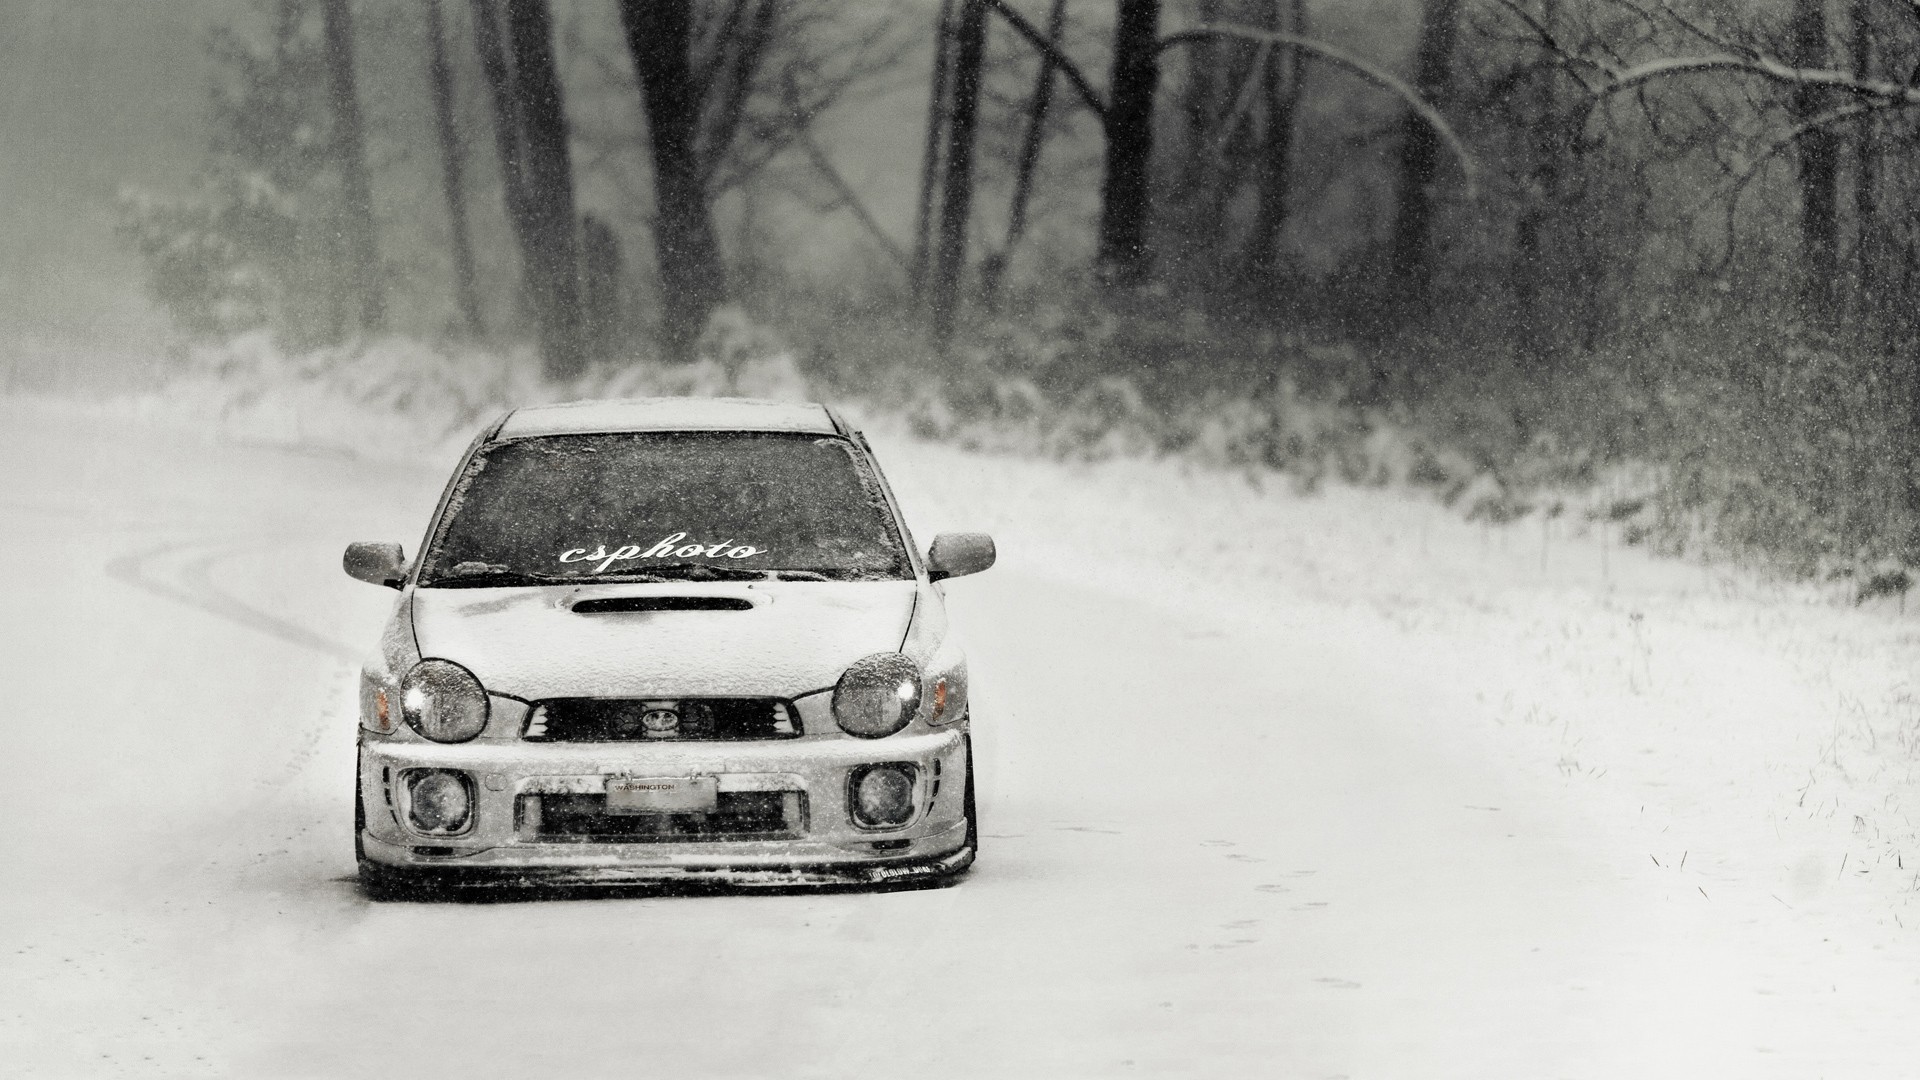 1920x1080 View, download, comment, and rate this  Subaru Impreza Wallpaper -  Wallpaper Abyss